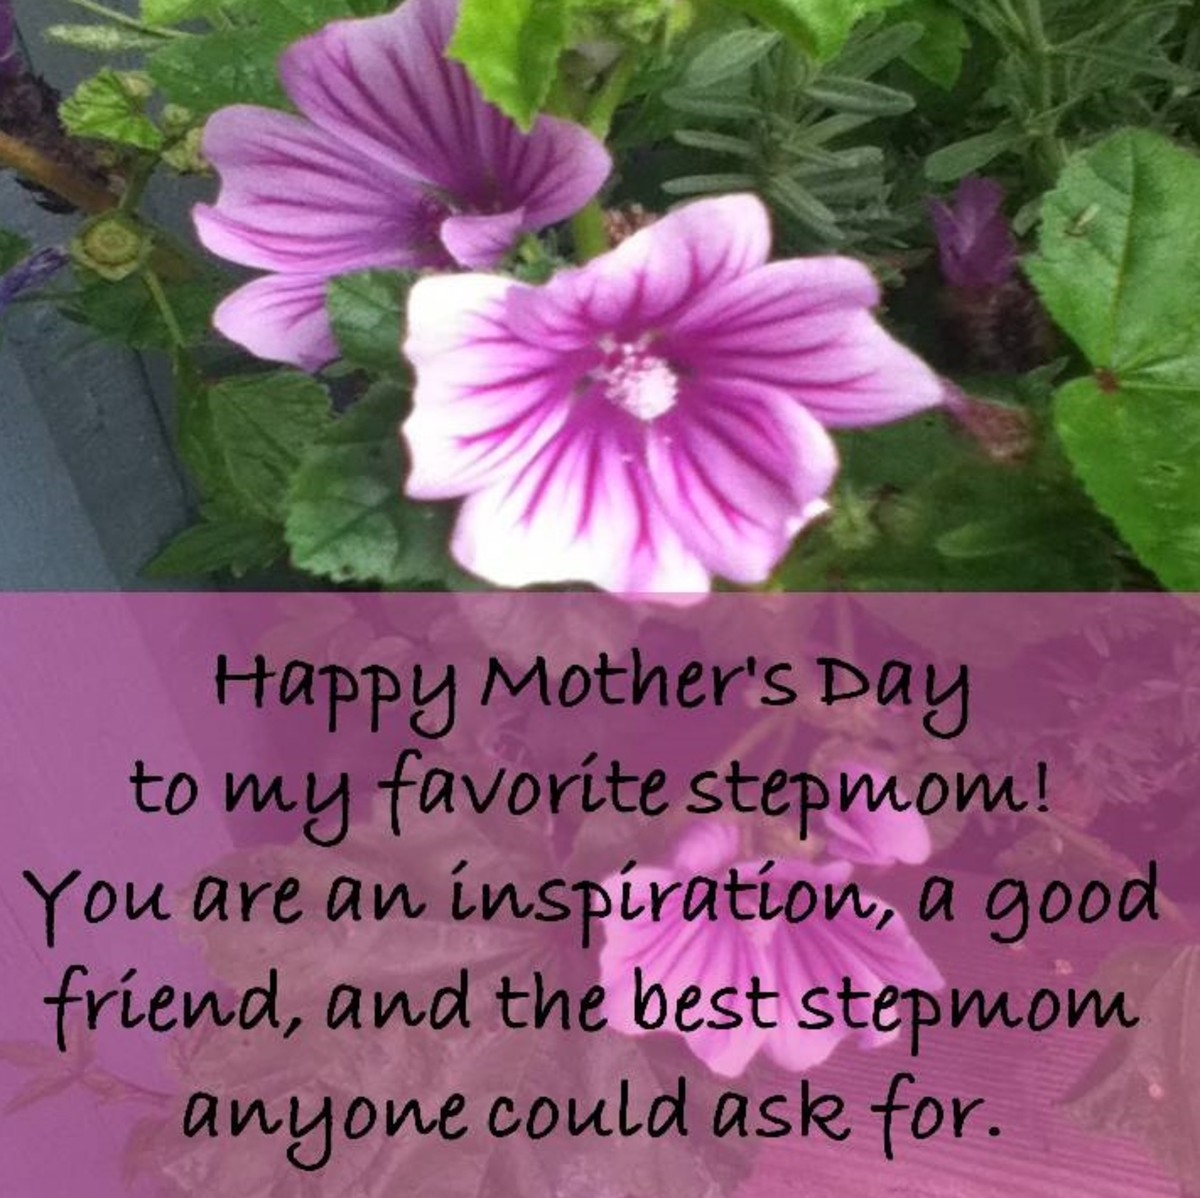 Card Greetings And Gift Ideas For A Stepmom On Mother S Day